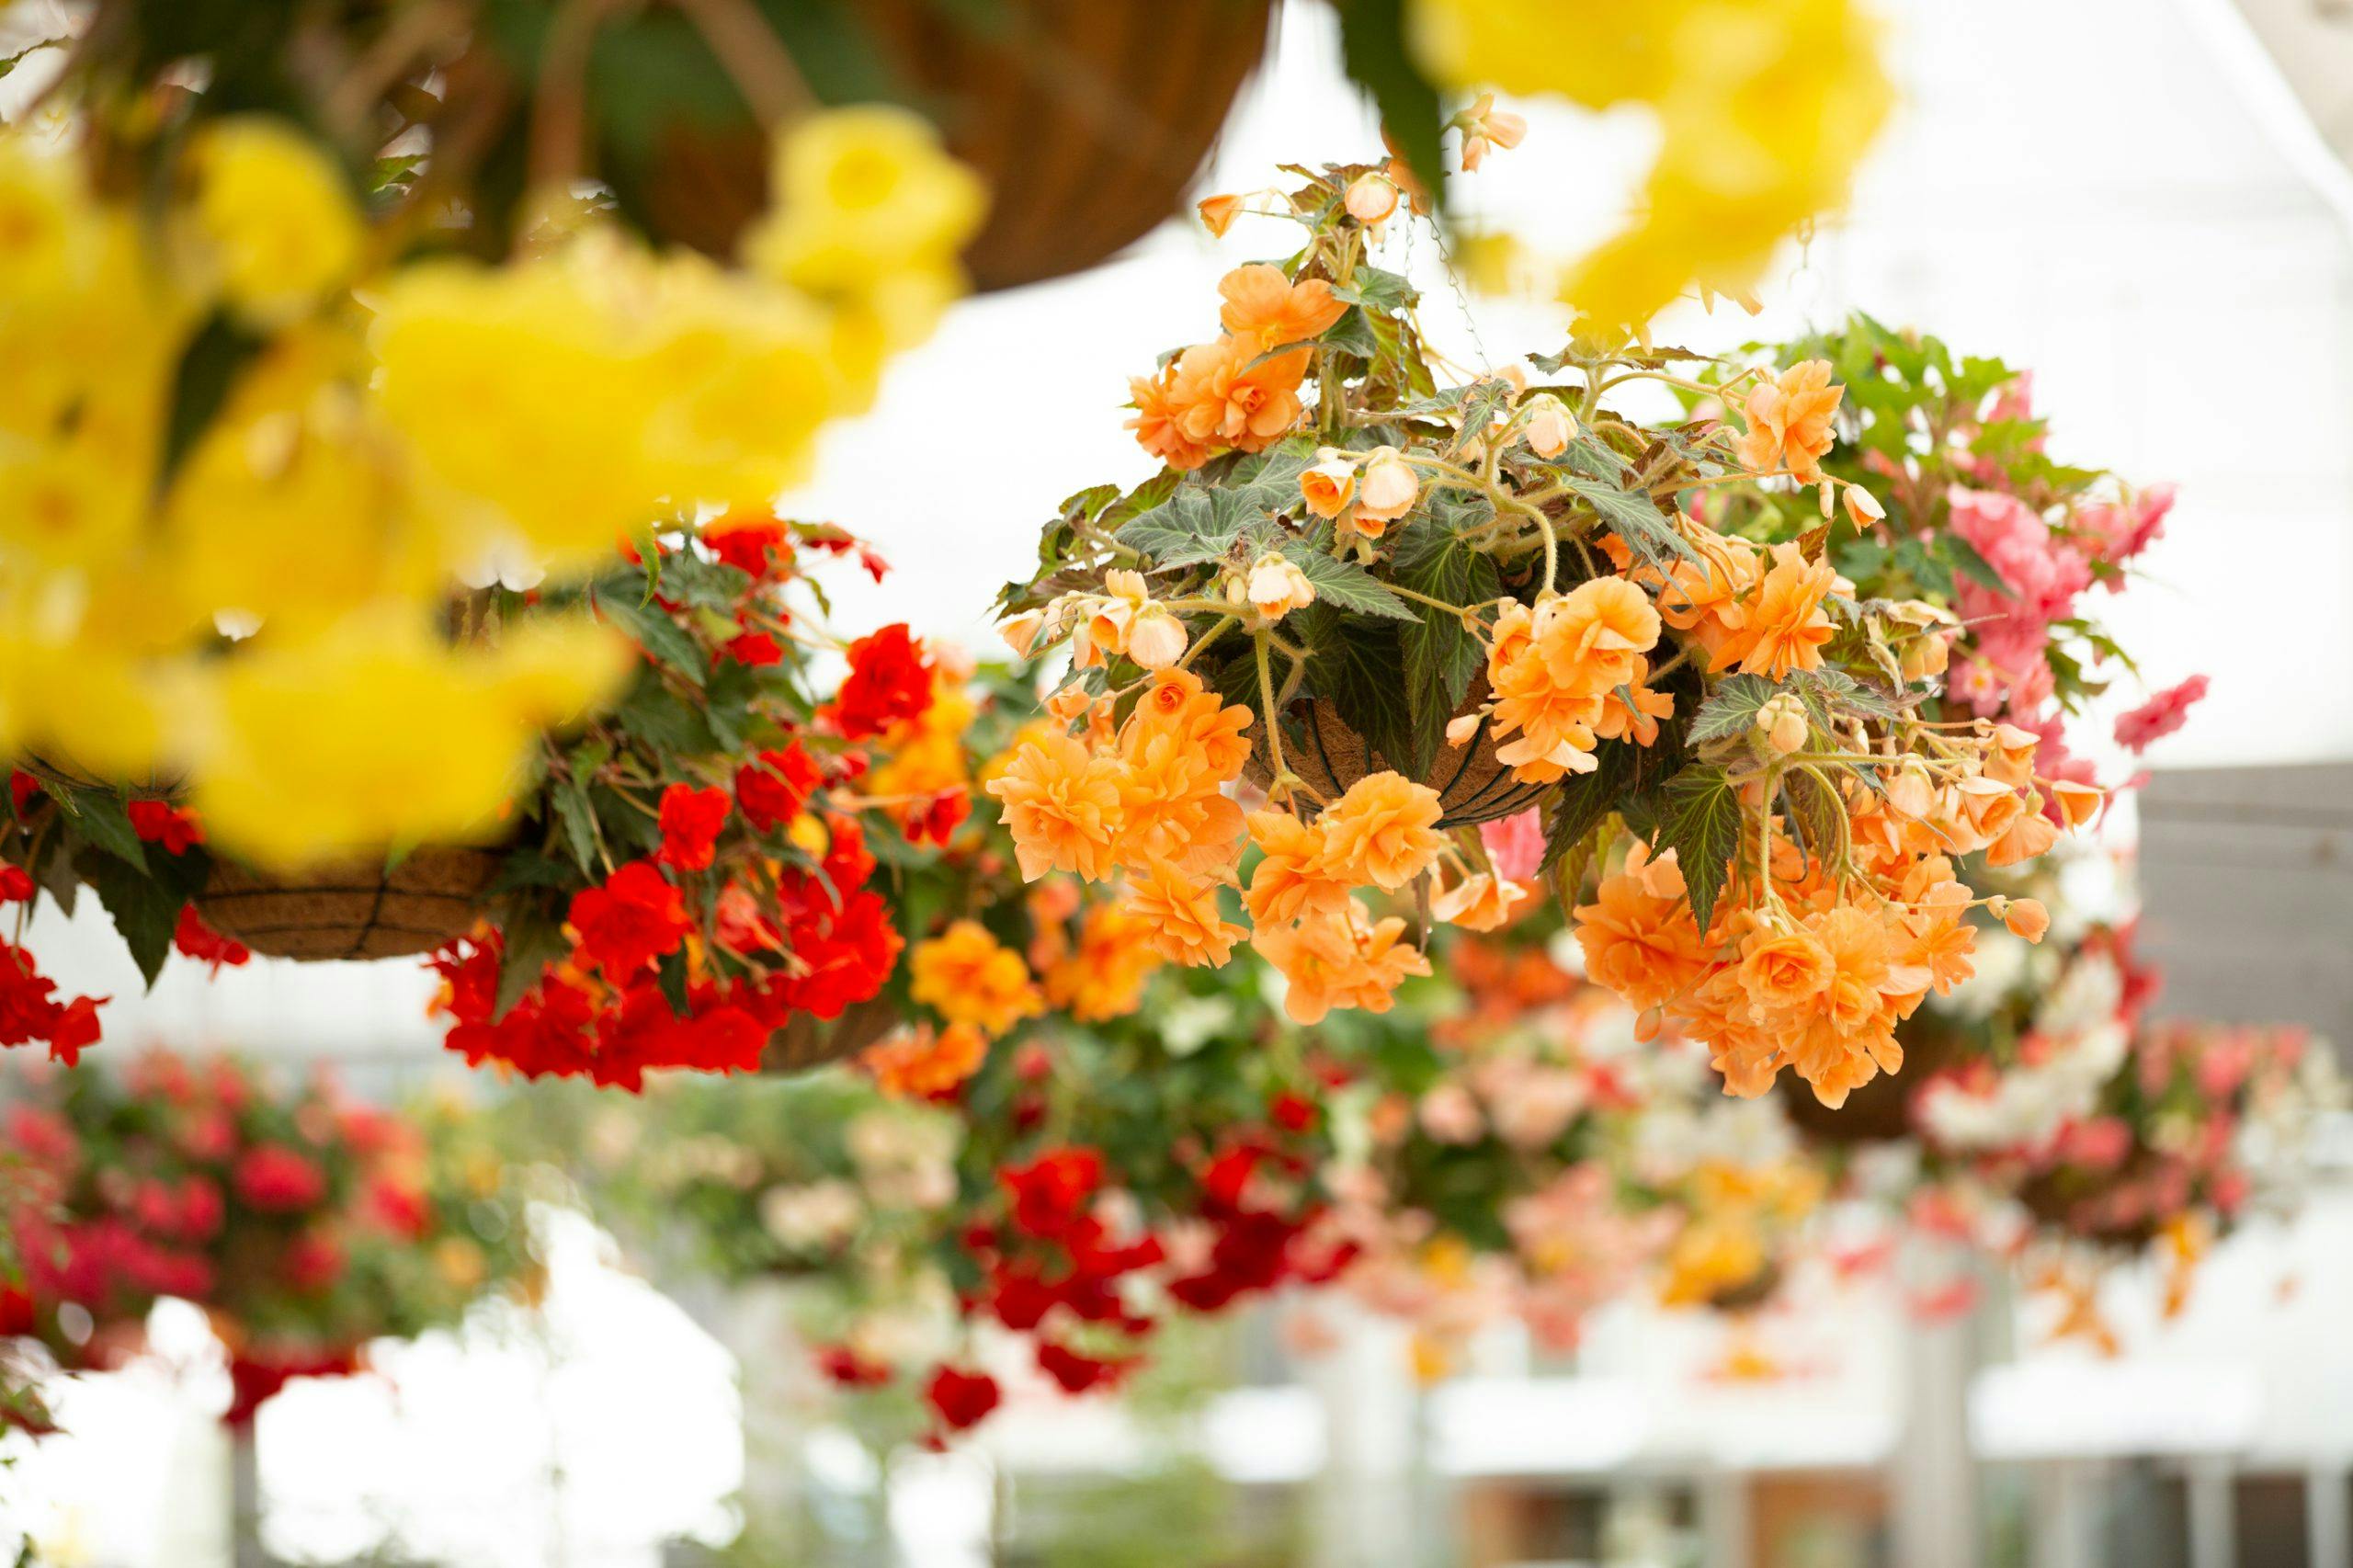 flowers displayed in hanging baskets